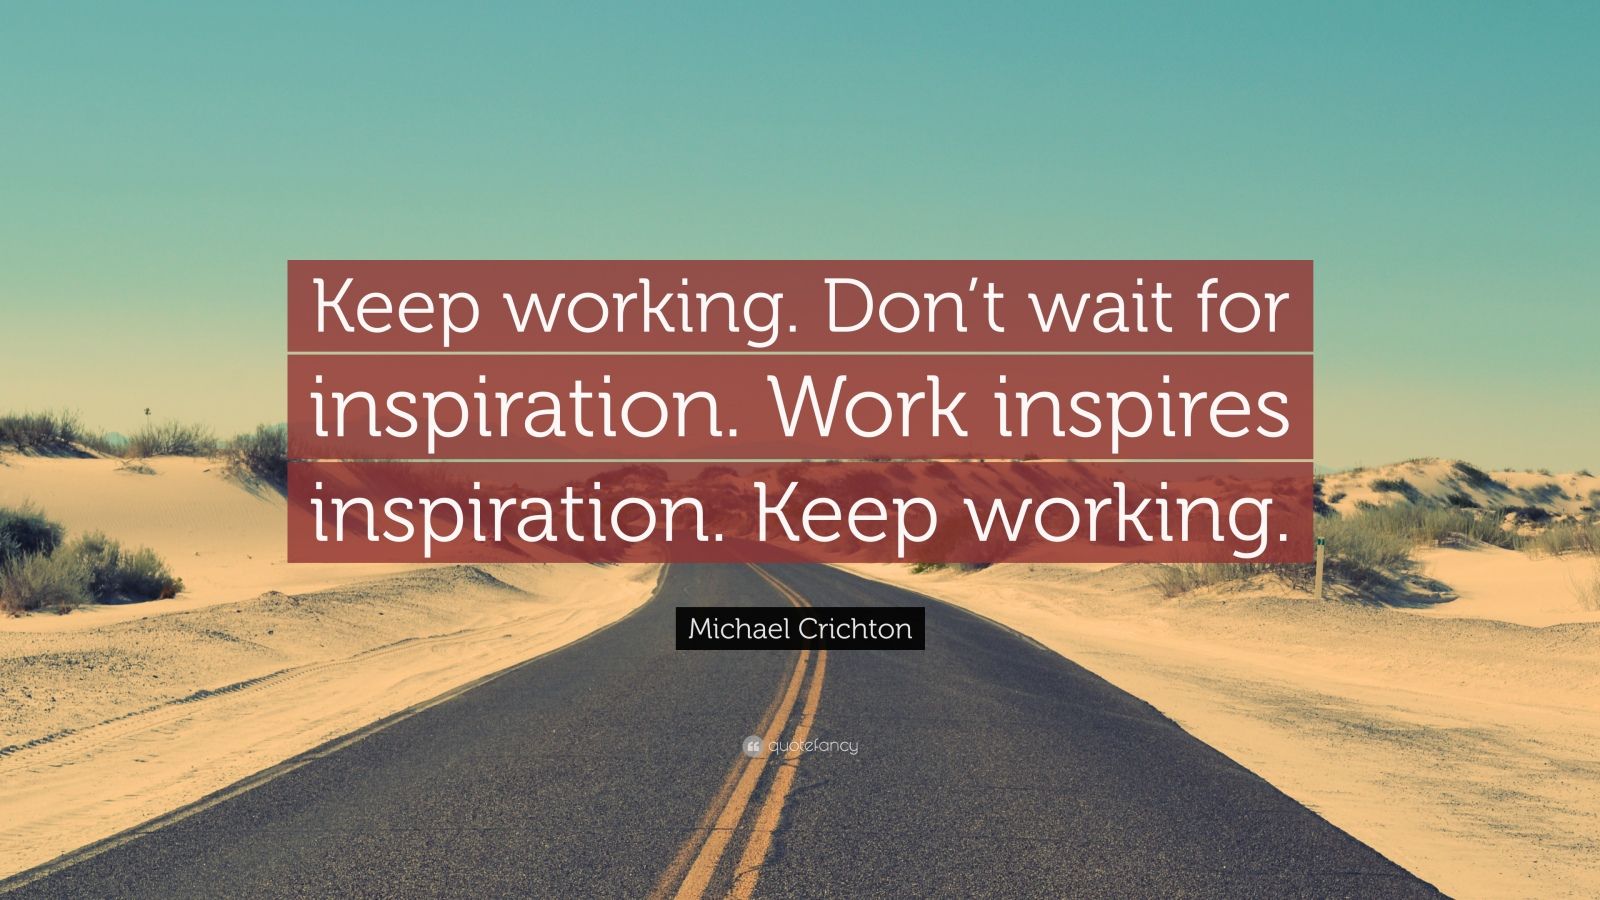 Michael Crichton Quote: “Keep working. Don’t wait for inspiration. Work